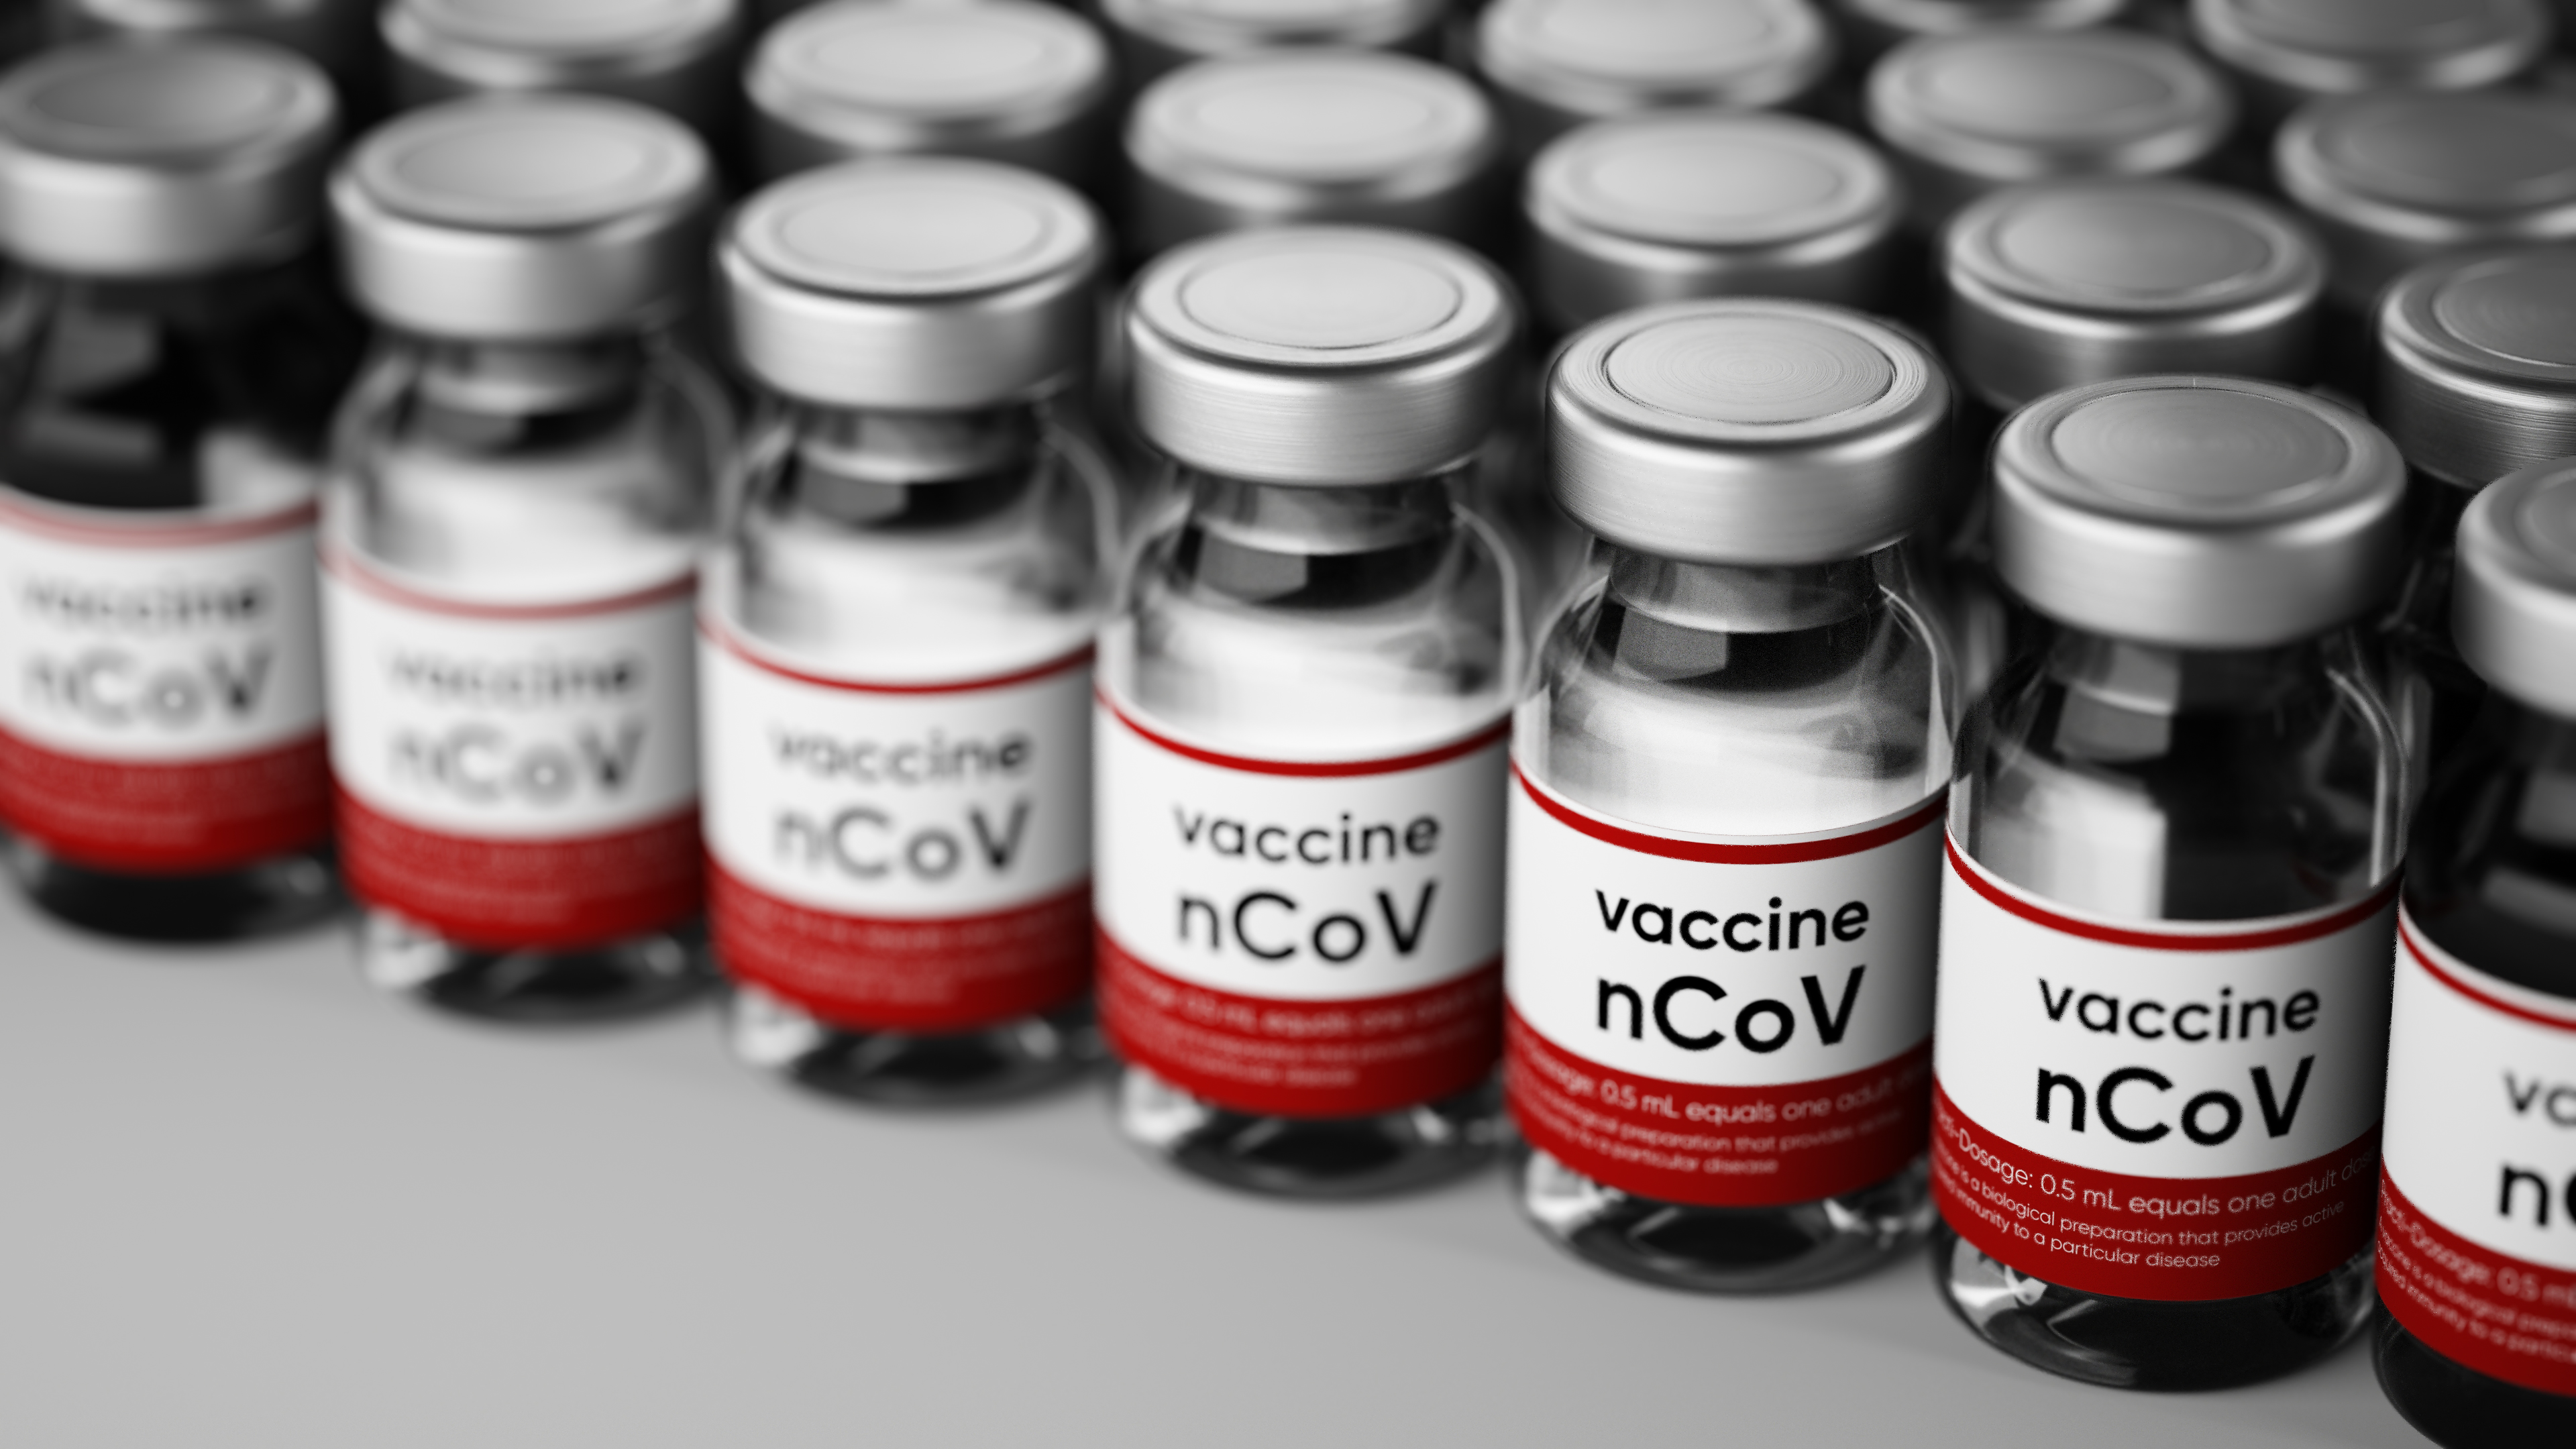 Is Russia's vaccine launch a risk or reward?